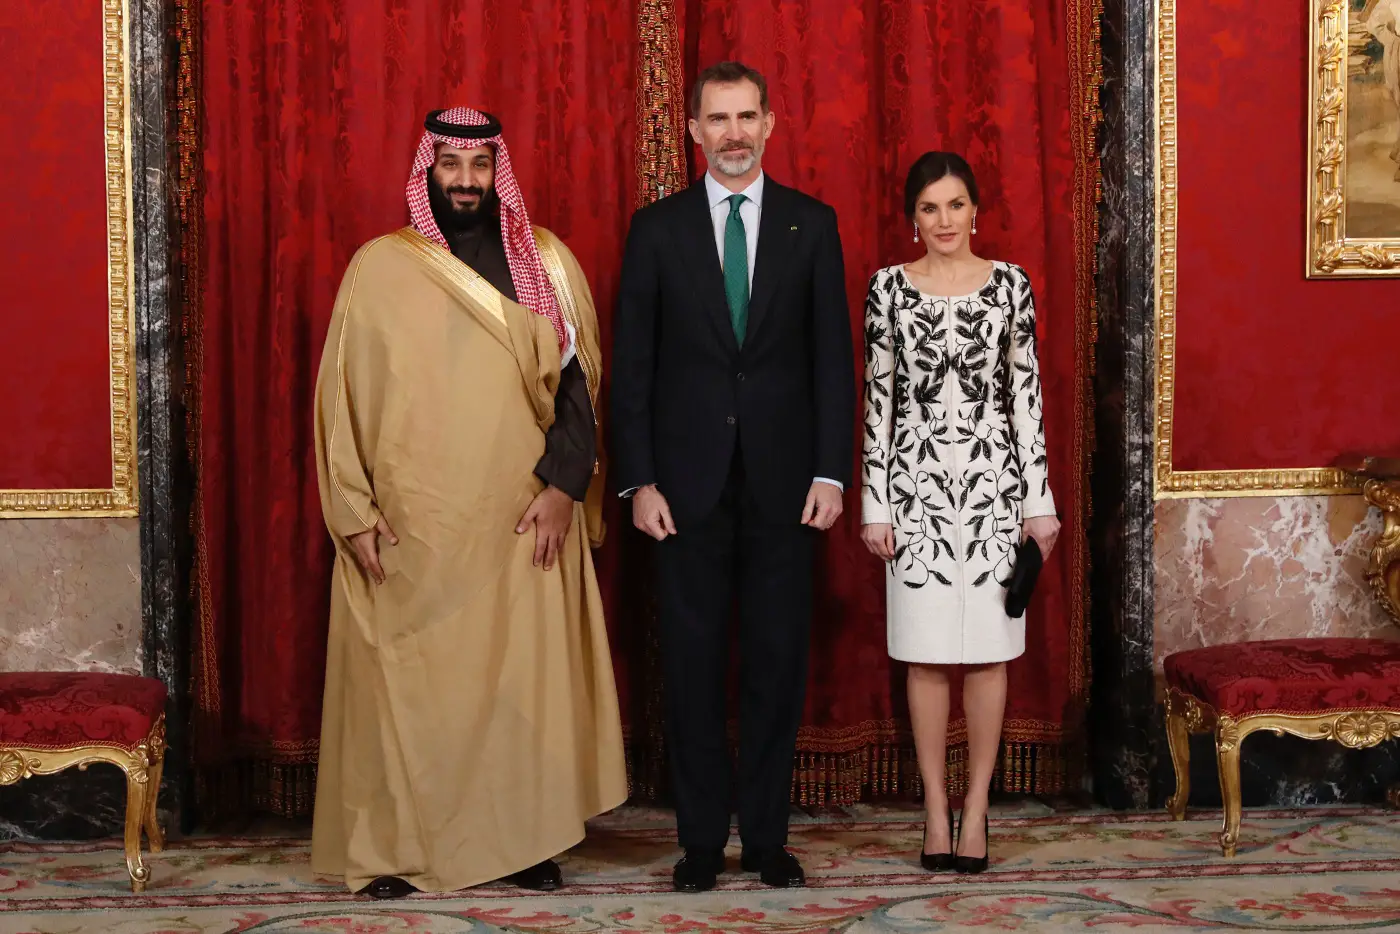 Letizia brought monochrome back for Royal Lunch with Saudi Prince